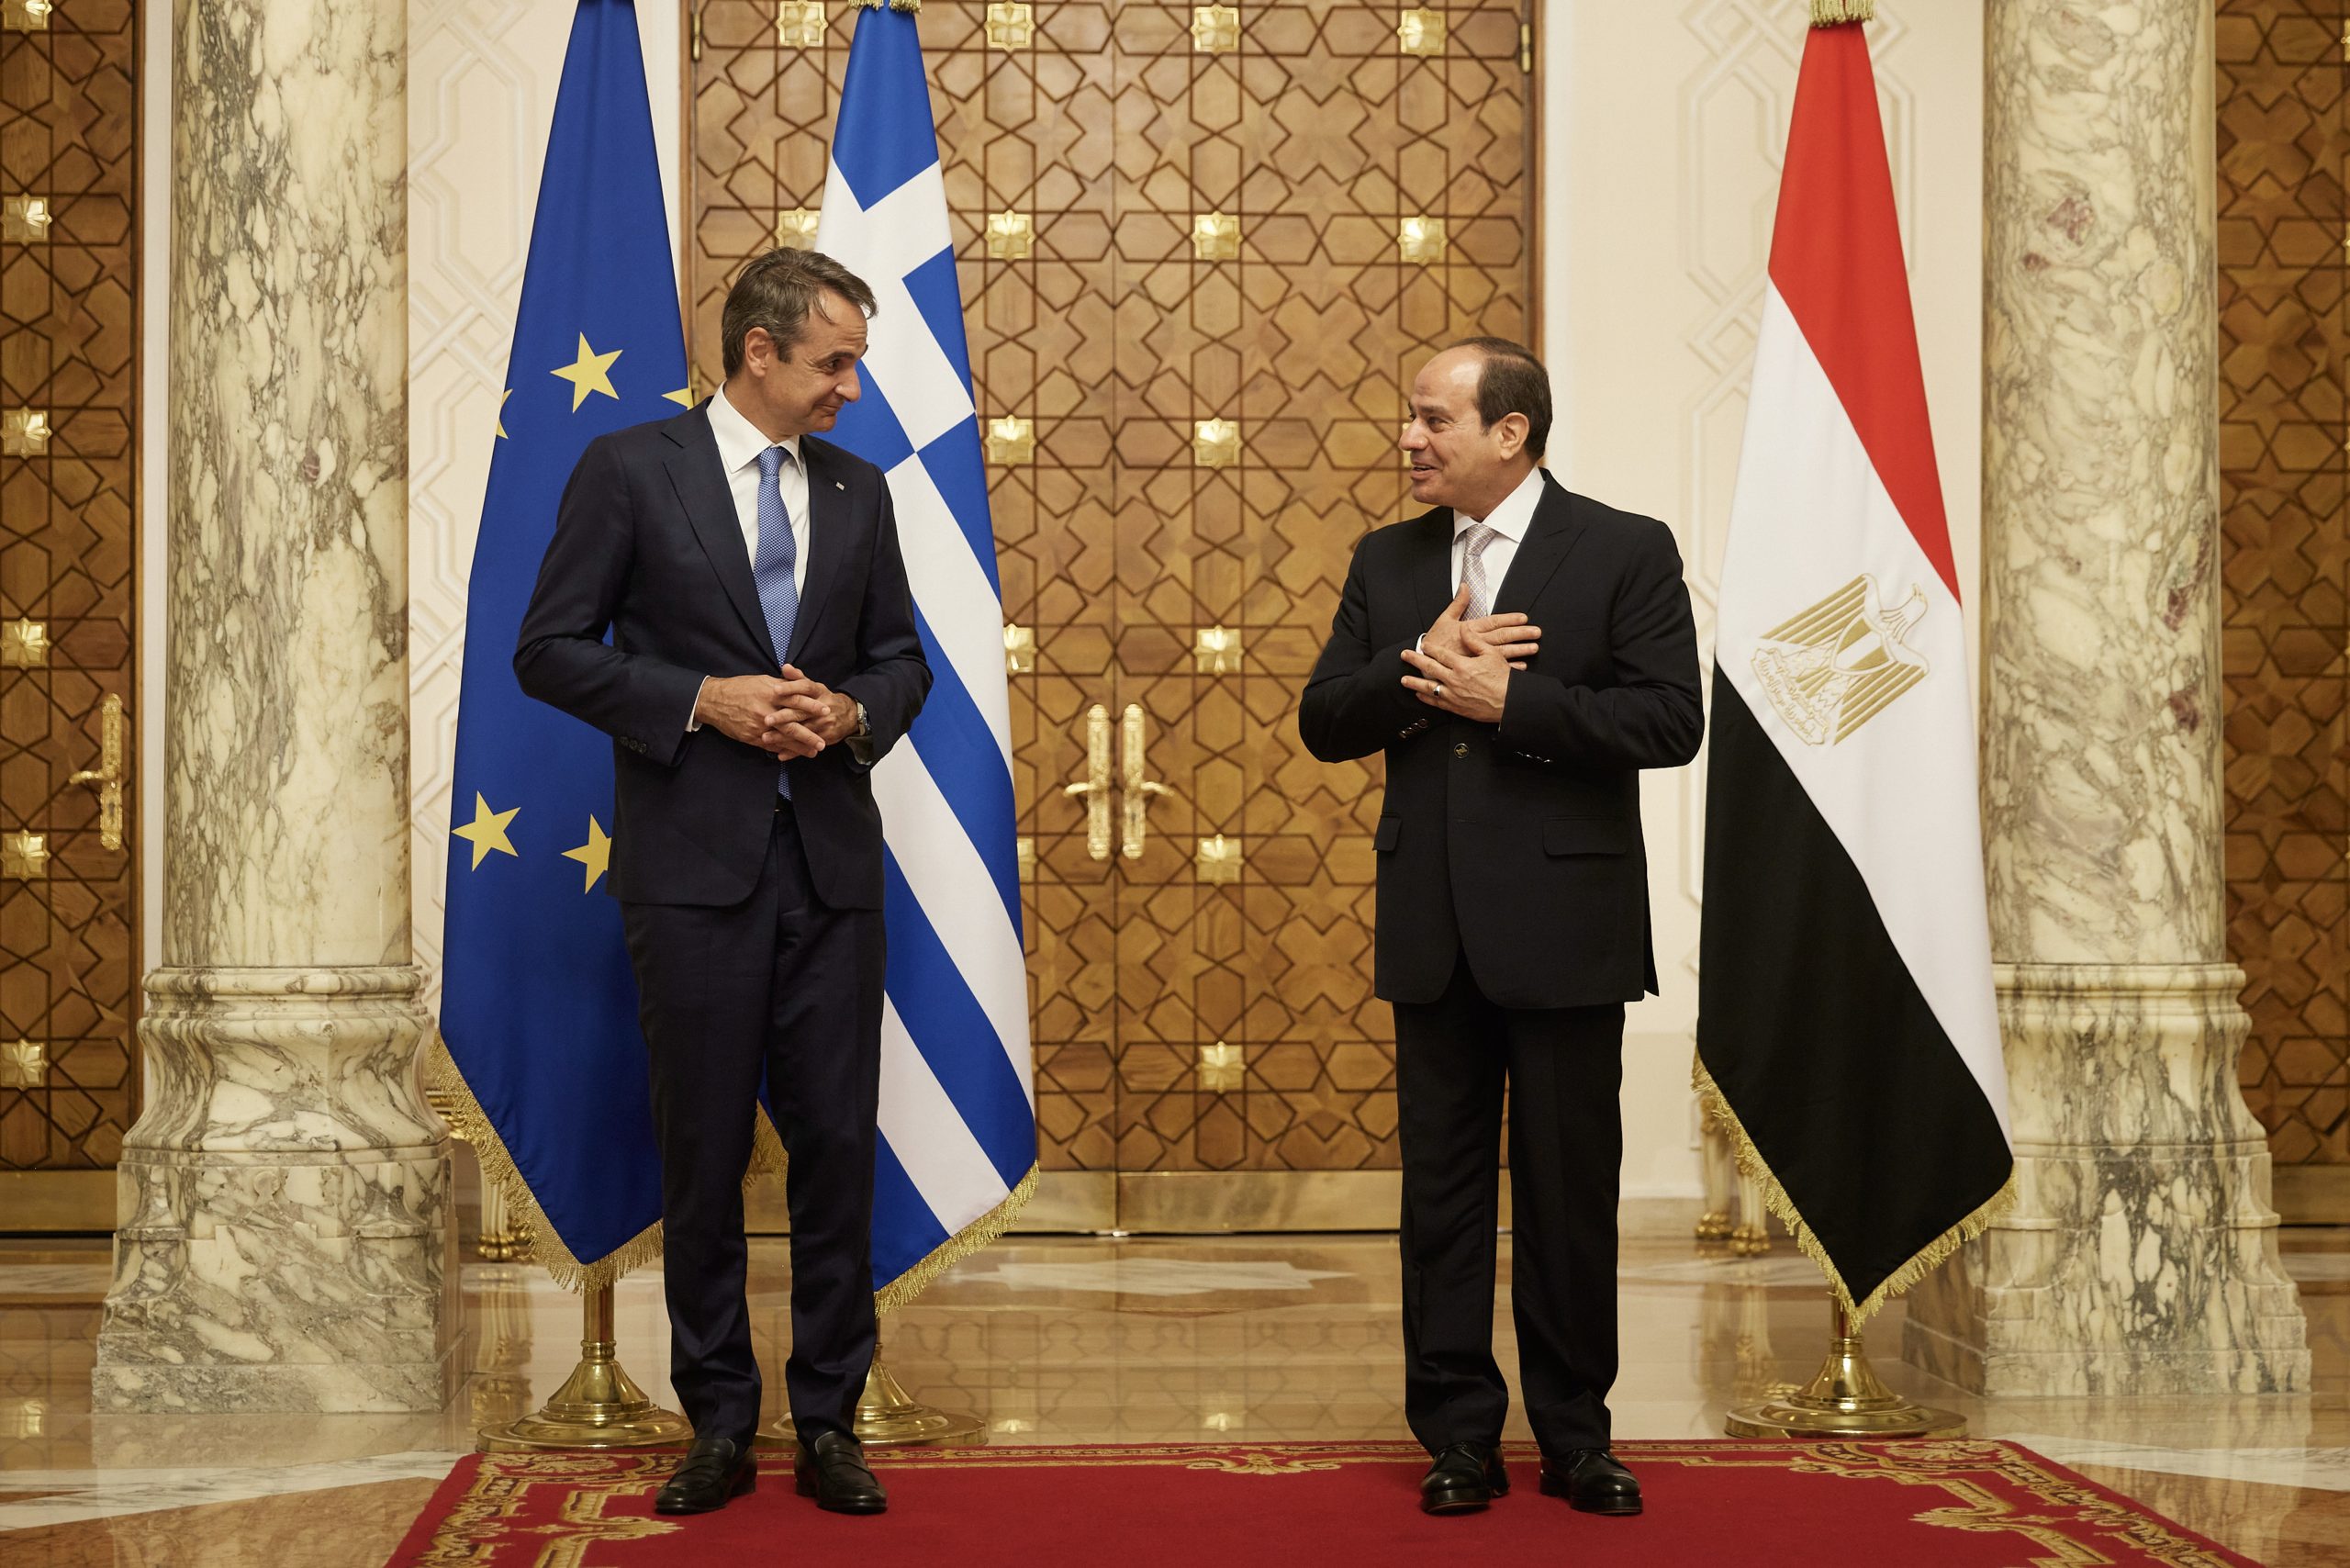 Further deepening of the Athens-Cairo cooperation